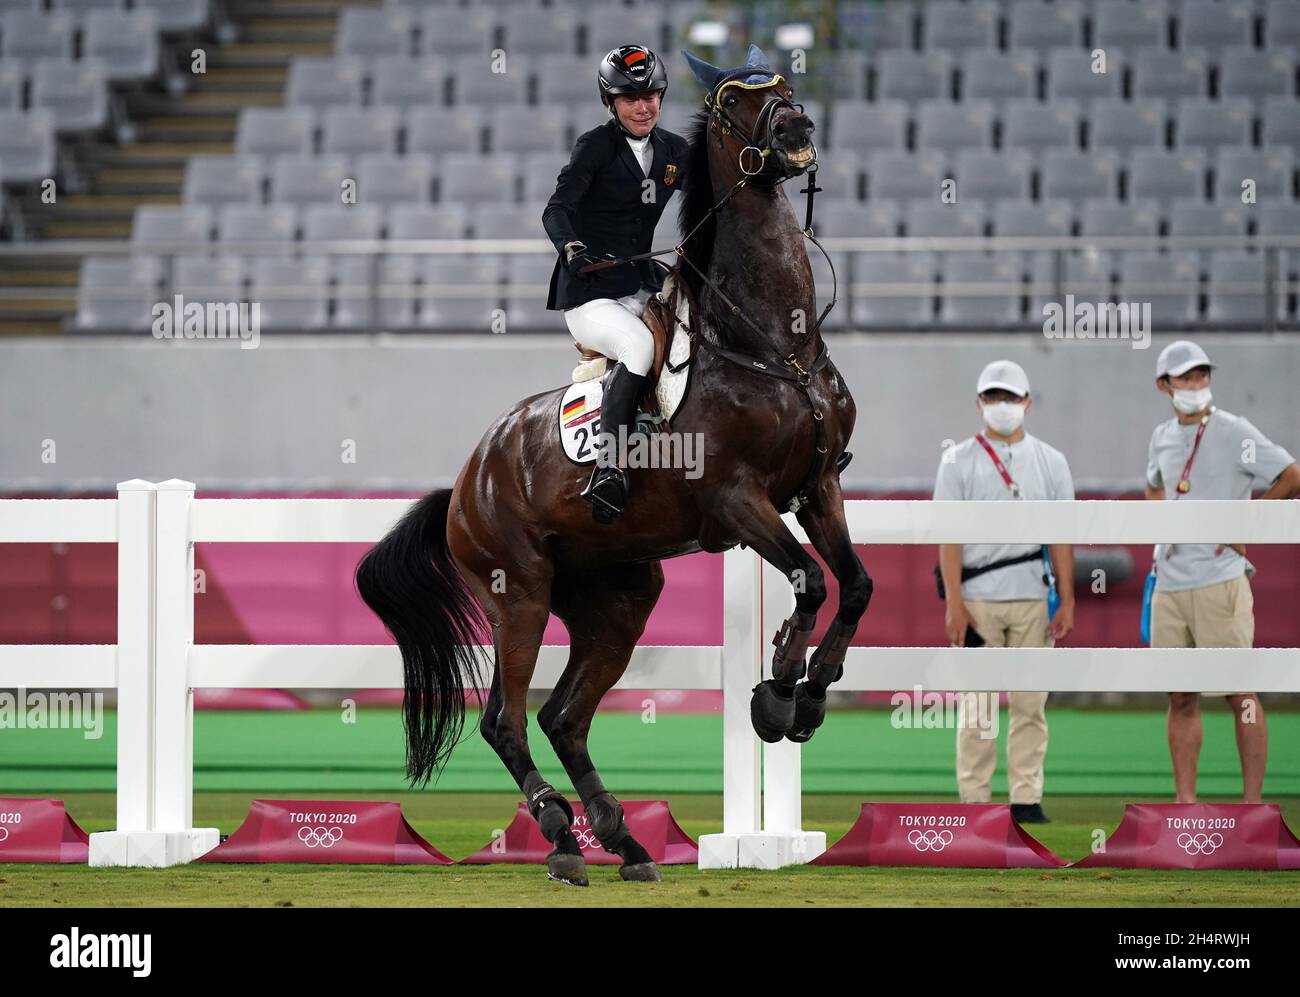 File photo dated 06-08-2021 of Annika Schleu of Germany during the Modern Pentathlon. Modern Pentathlon chiefs have confirmed that horse riding will be removed from the sport after the Paris 2024 Olympics, with the search already underway for a suitable replacement. Issue date: Thursday November 4, 2021. Stock Photo